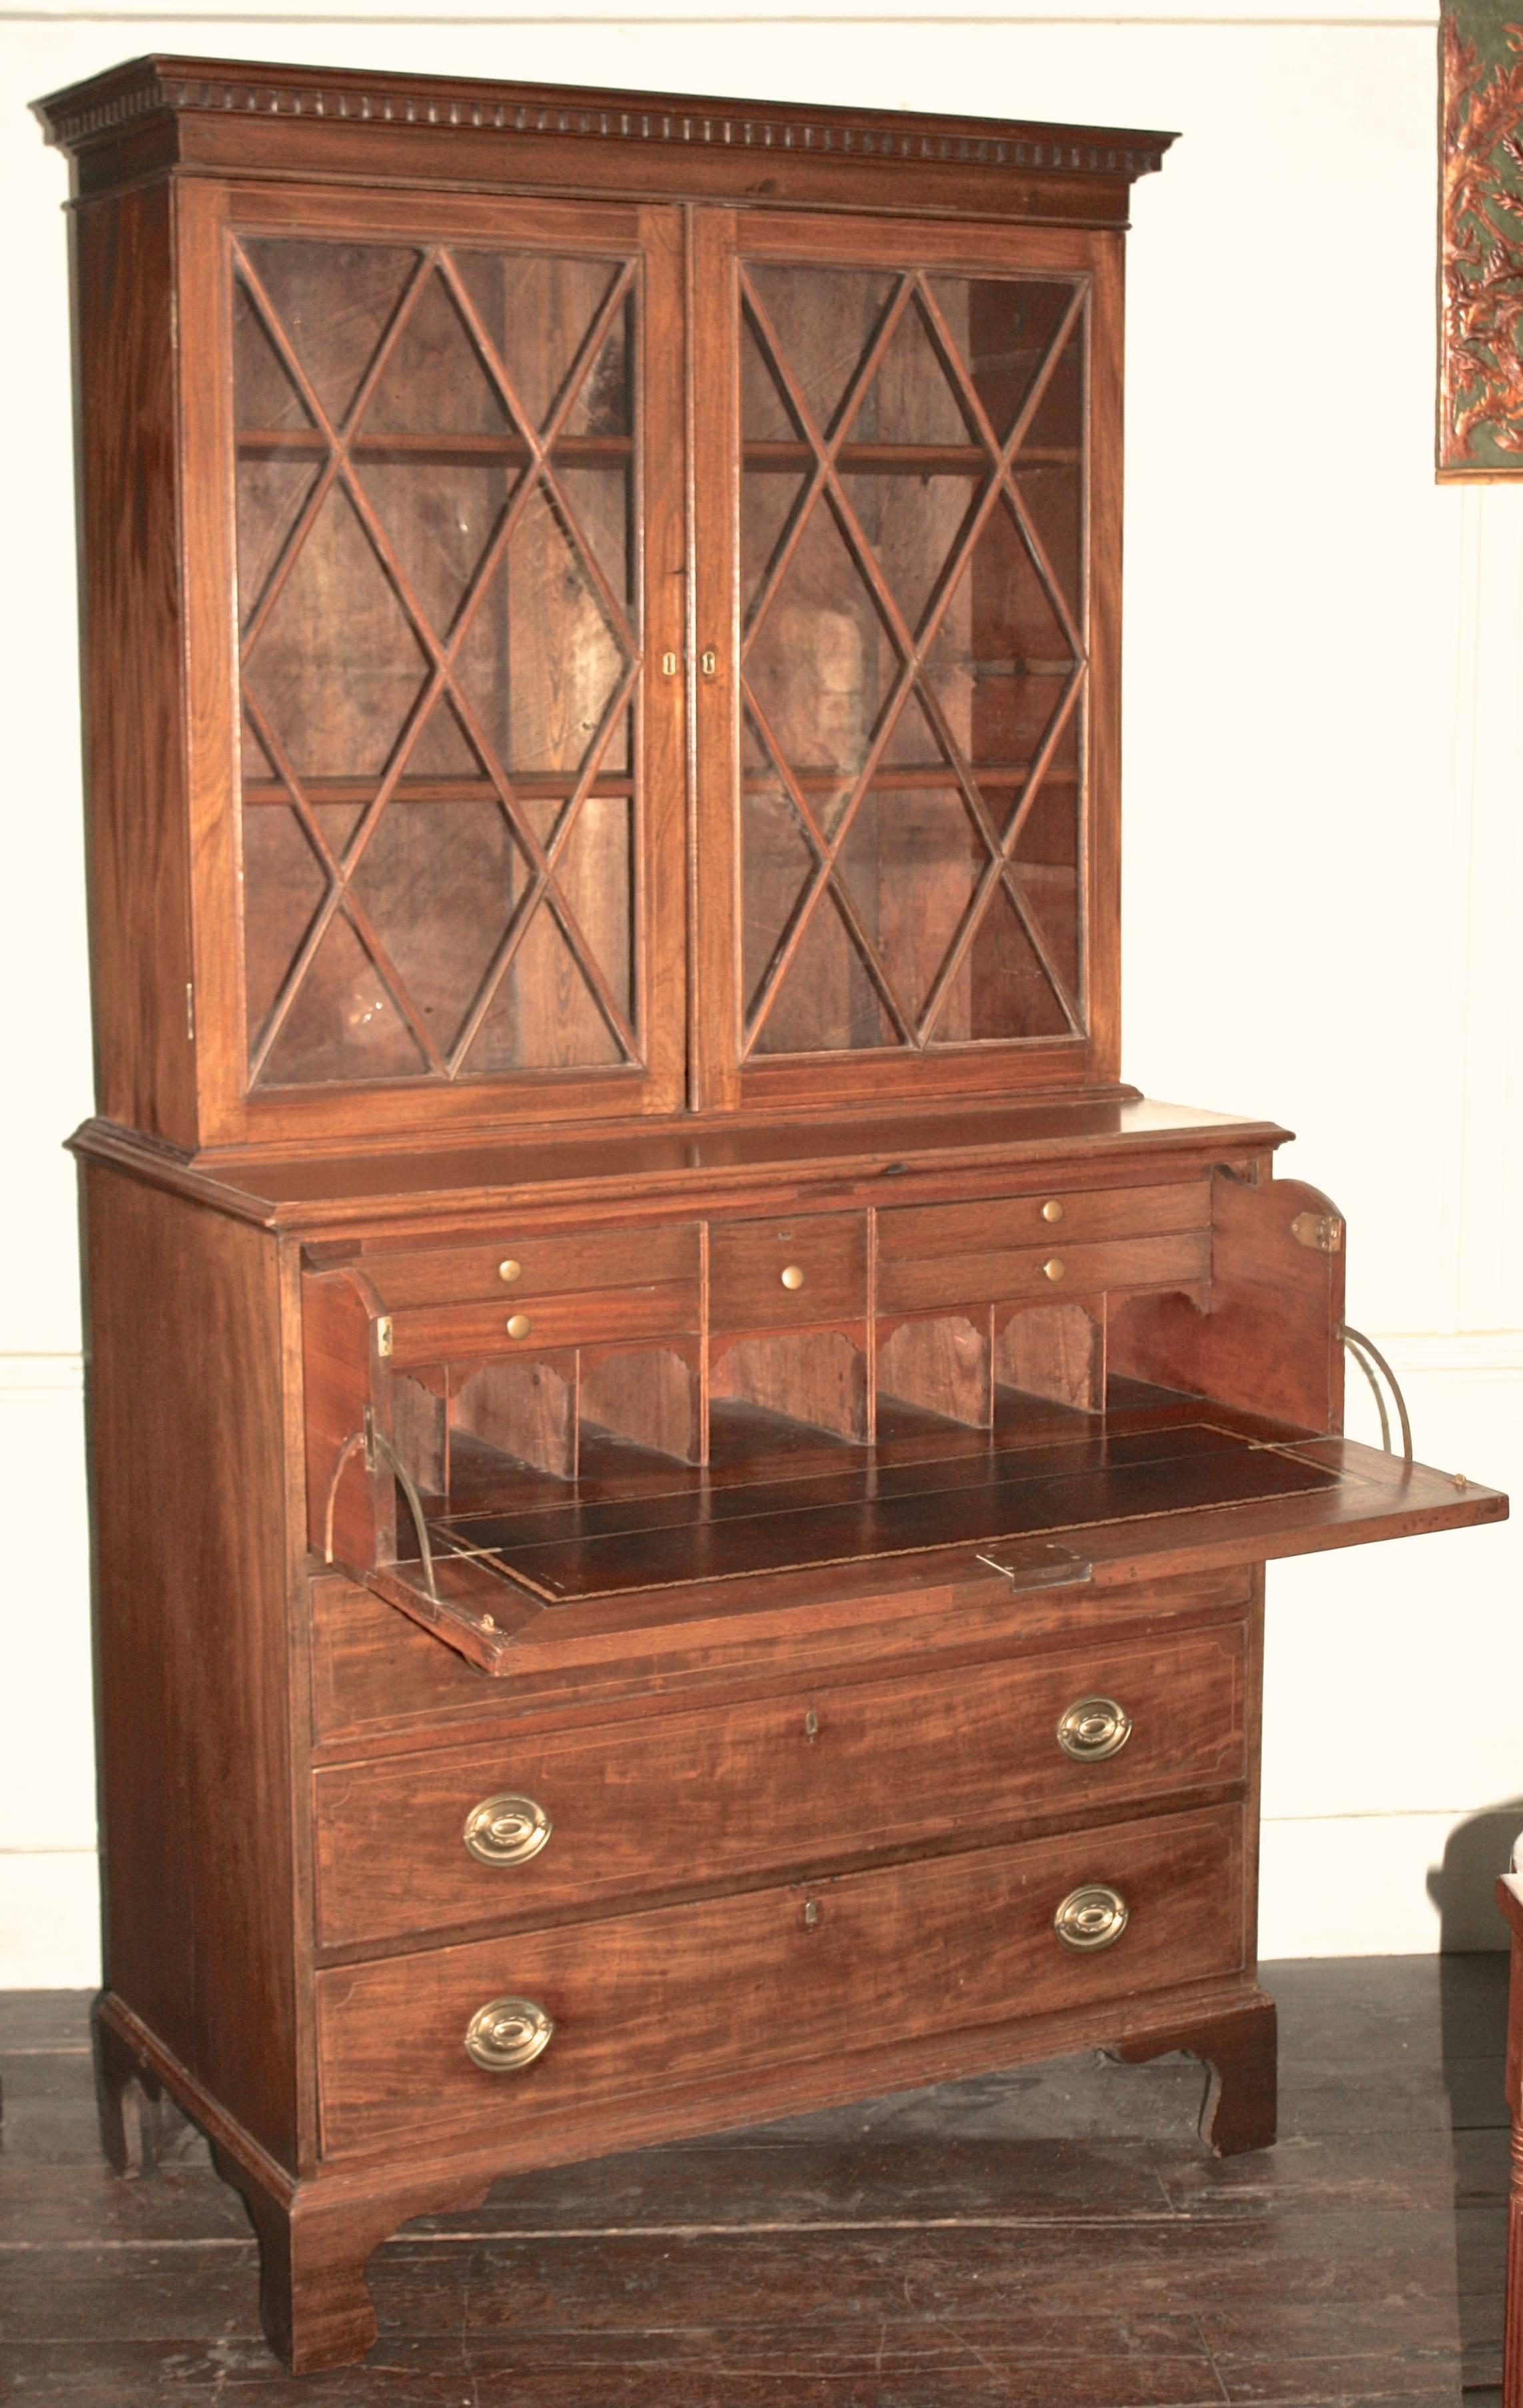 A Federal period pale mahogany Hepplewhite manner secretary bookcase with very fine rope and string inlays. Finish, glass, brasses and locks all original. In two parts: Three shelf bookcase with diamond mullioned doors, atop a lower case containing